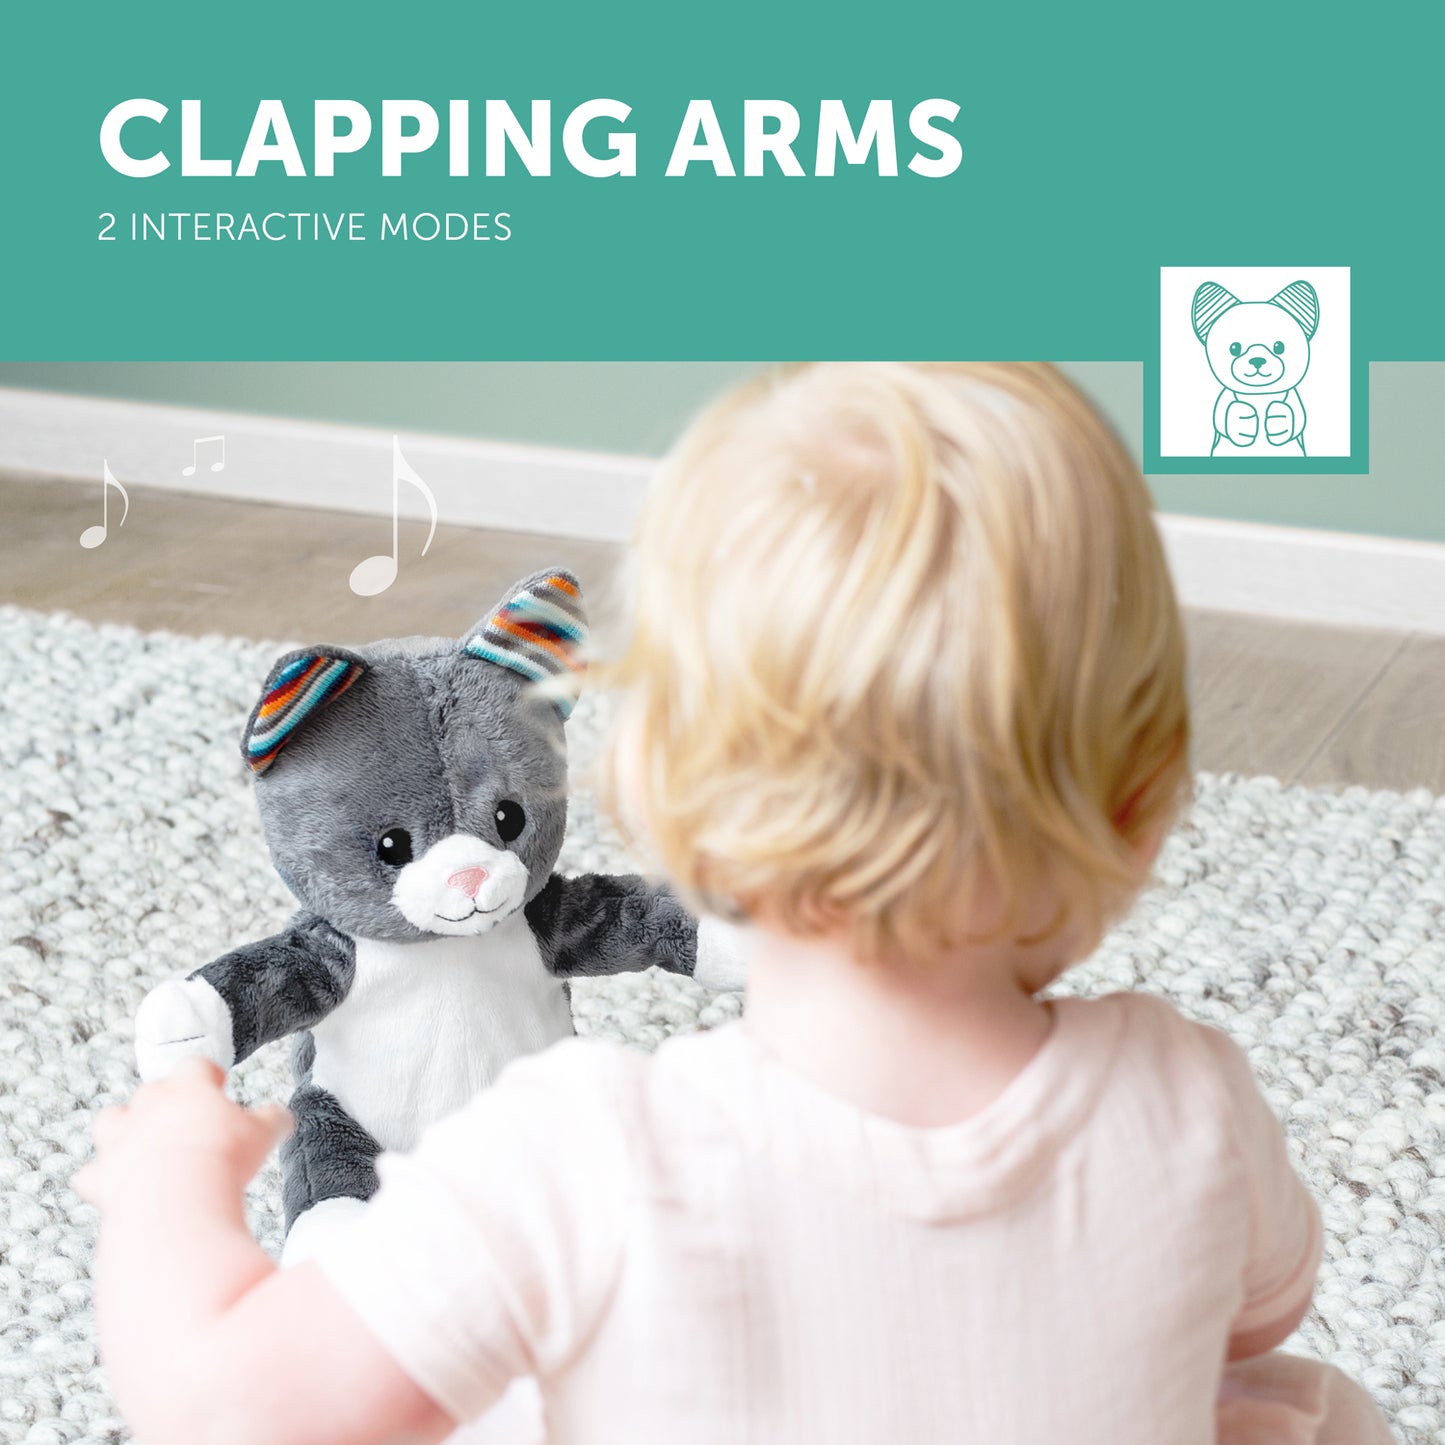 [Zazu] Chloe the Cat, Interactive Soft Toy with Clapping Hands and Sound - 0months+